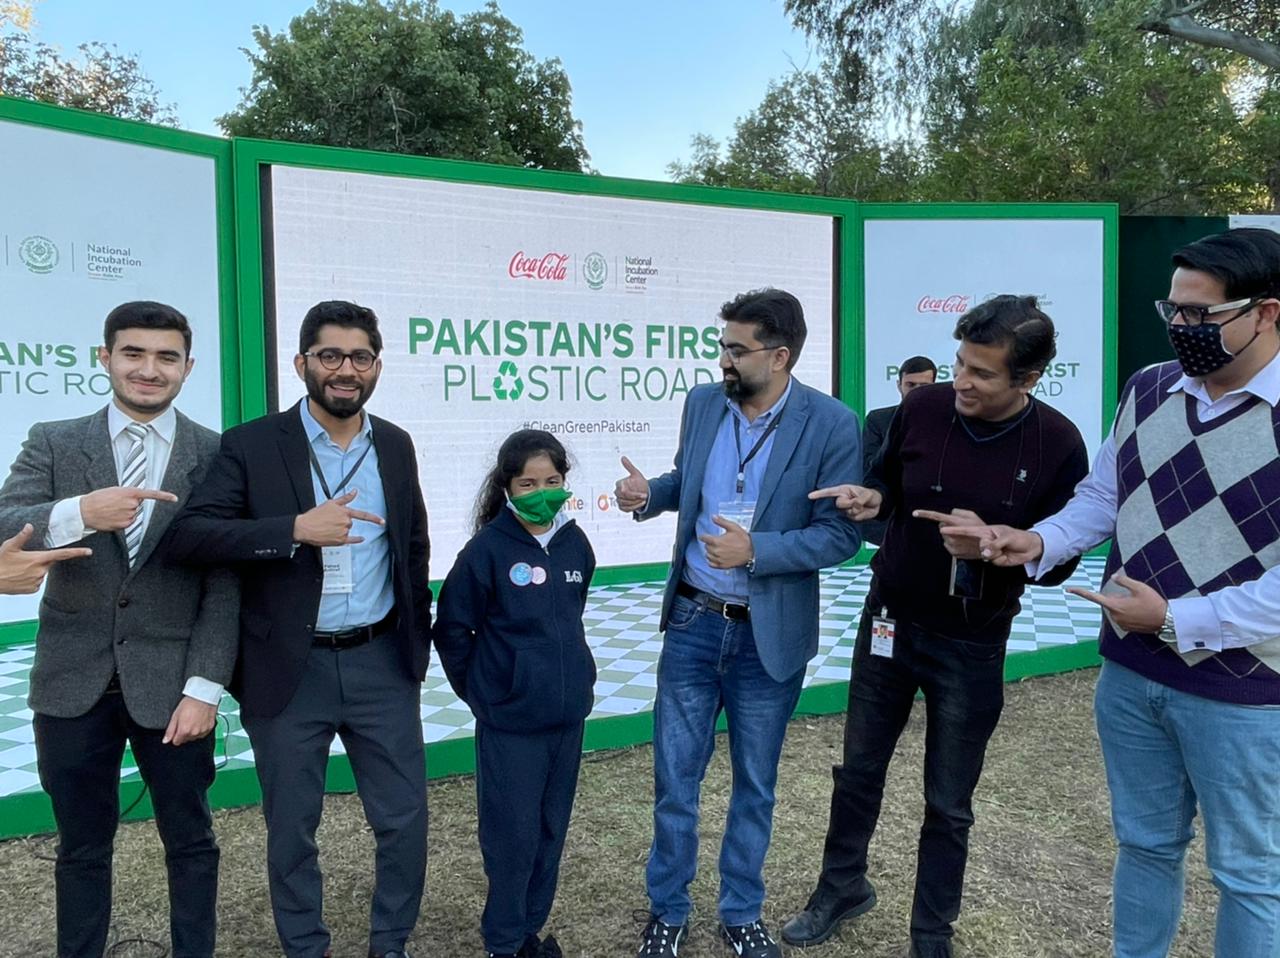 A group of people in front of a banner that says 'Pakistan's First Plastic Road'